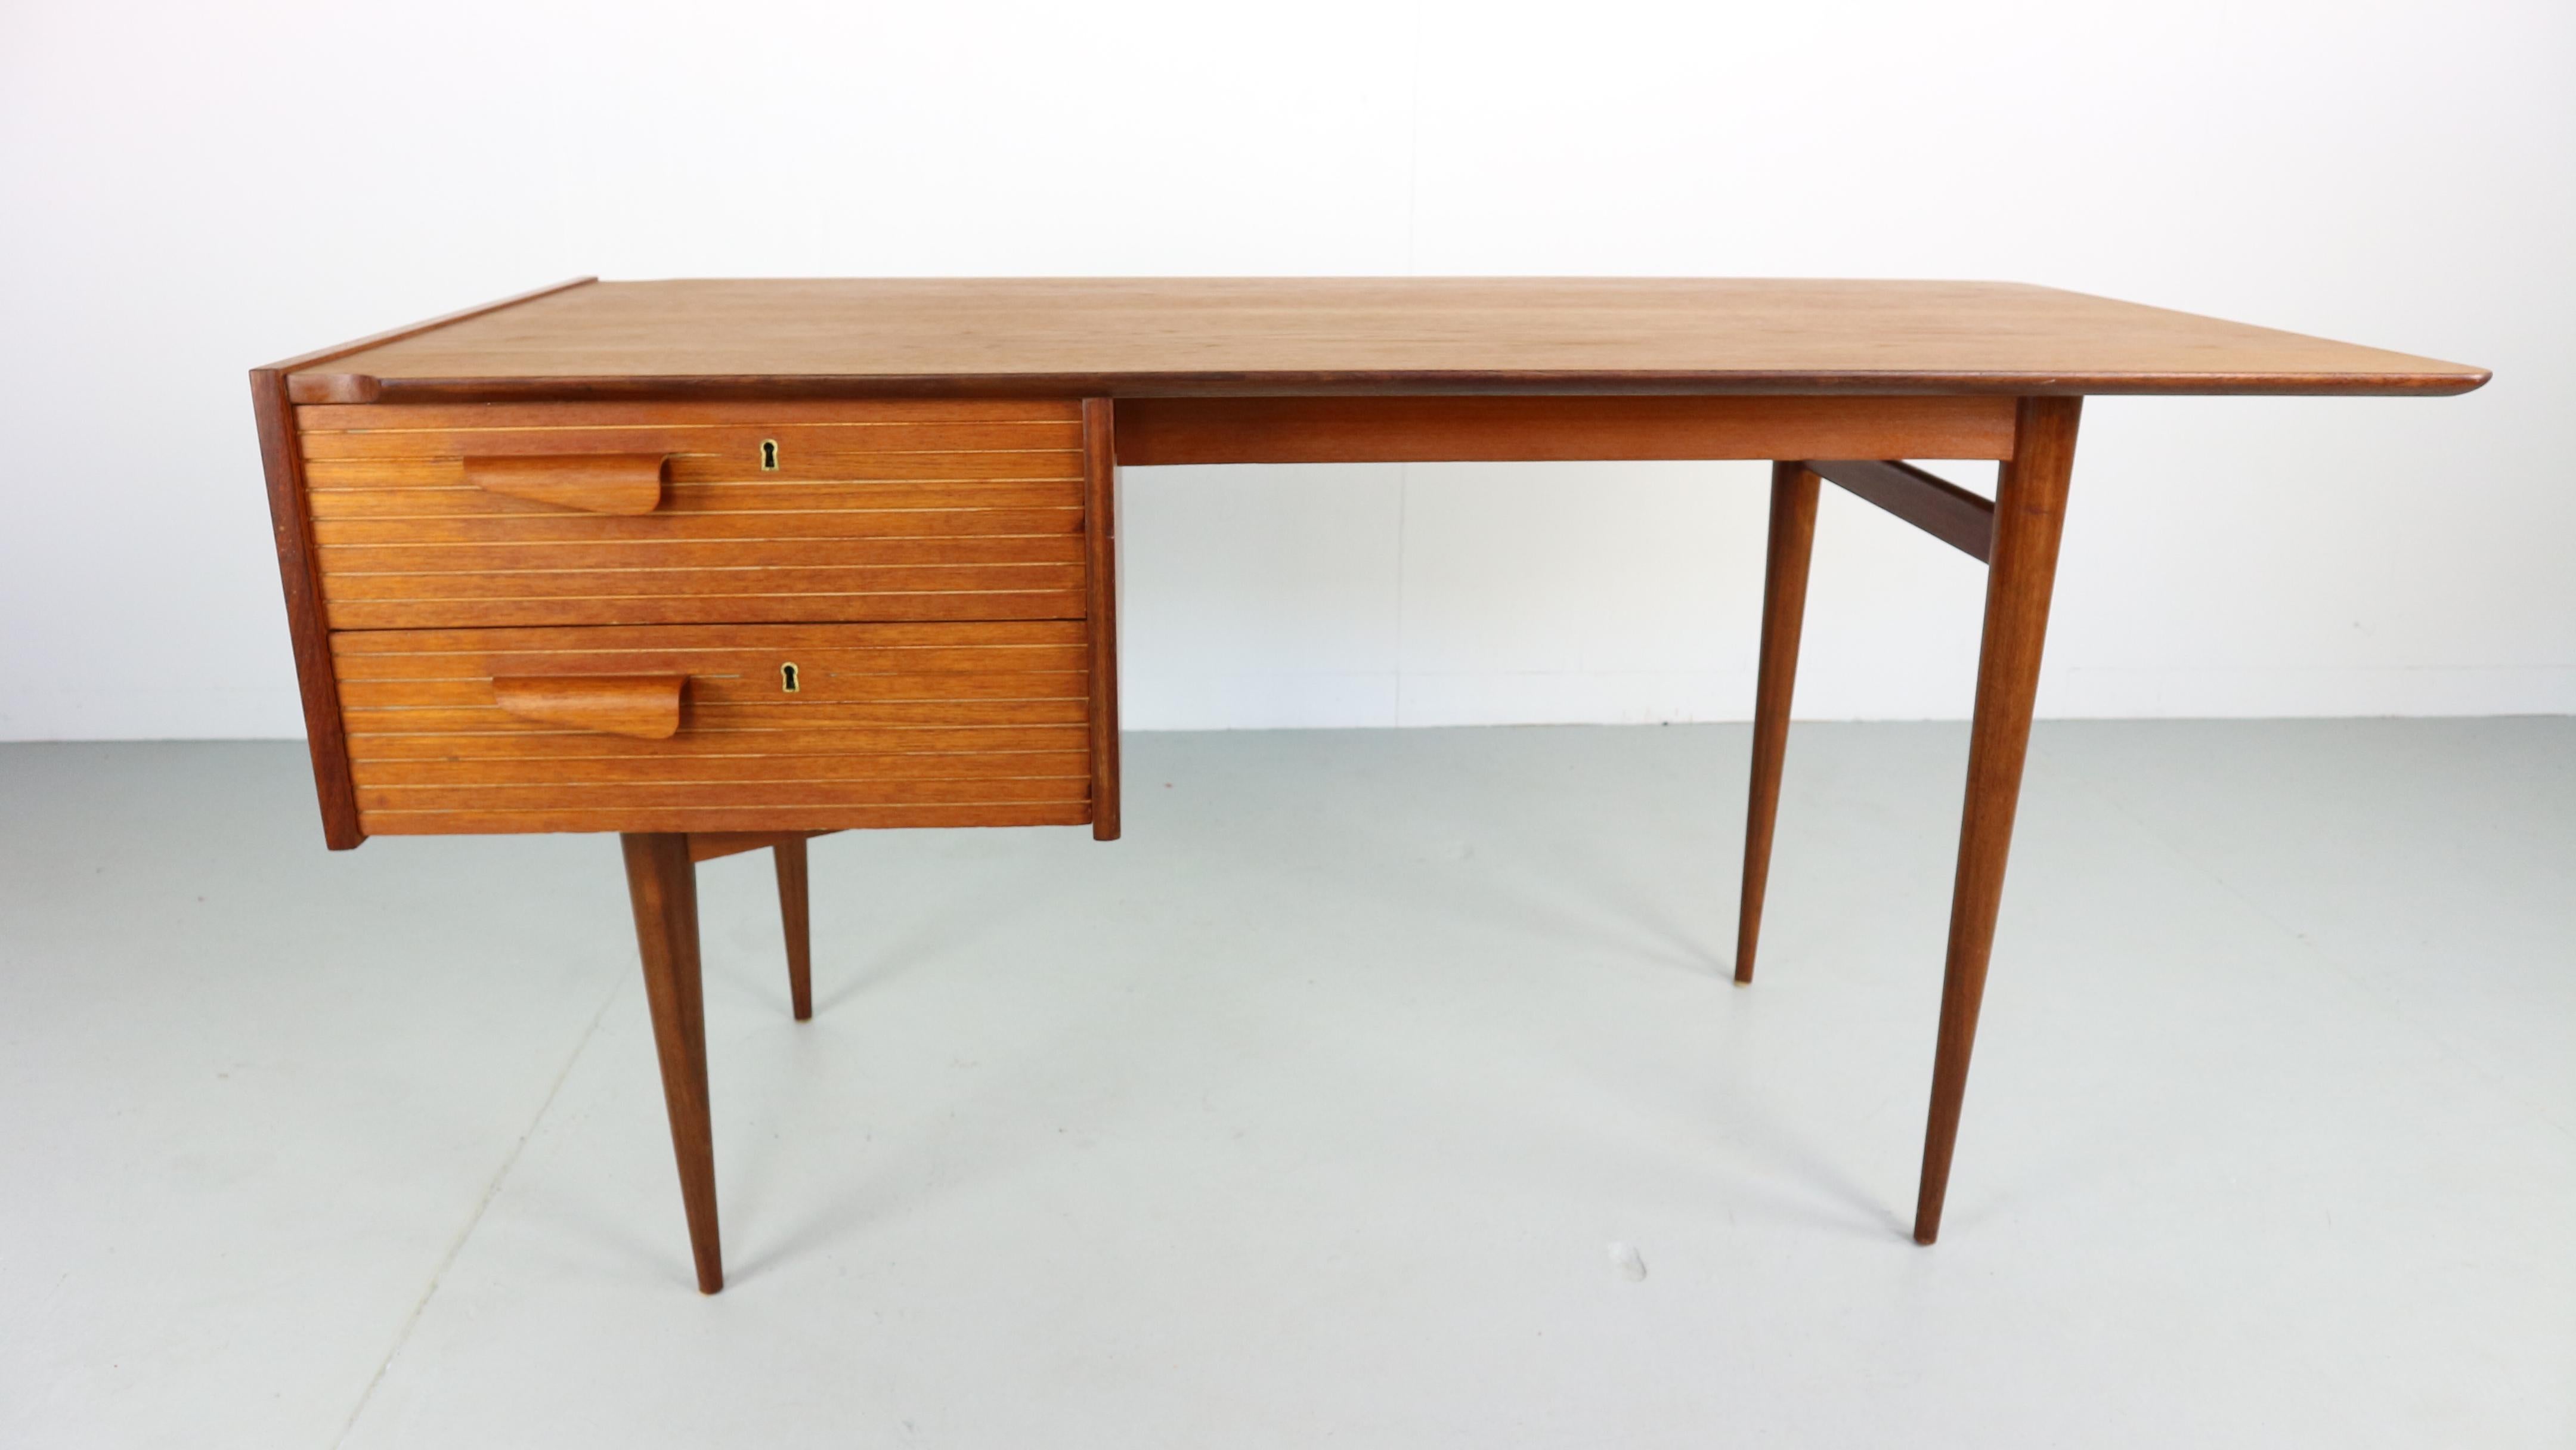 Charming Scandinavian Modern writing-desk, 1950s.
Perfect condition including both original keys.
Minimalistic design, bentwood handles and beautiful grain in the wood.
 